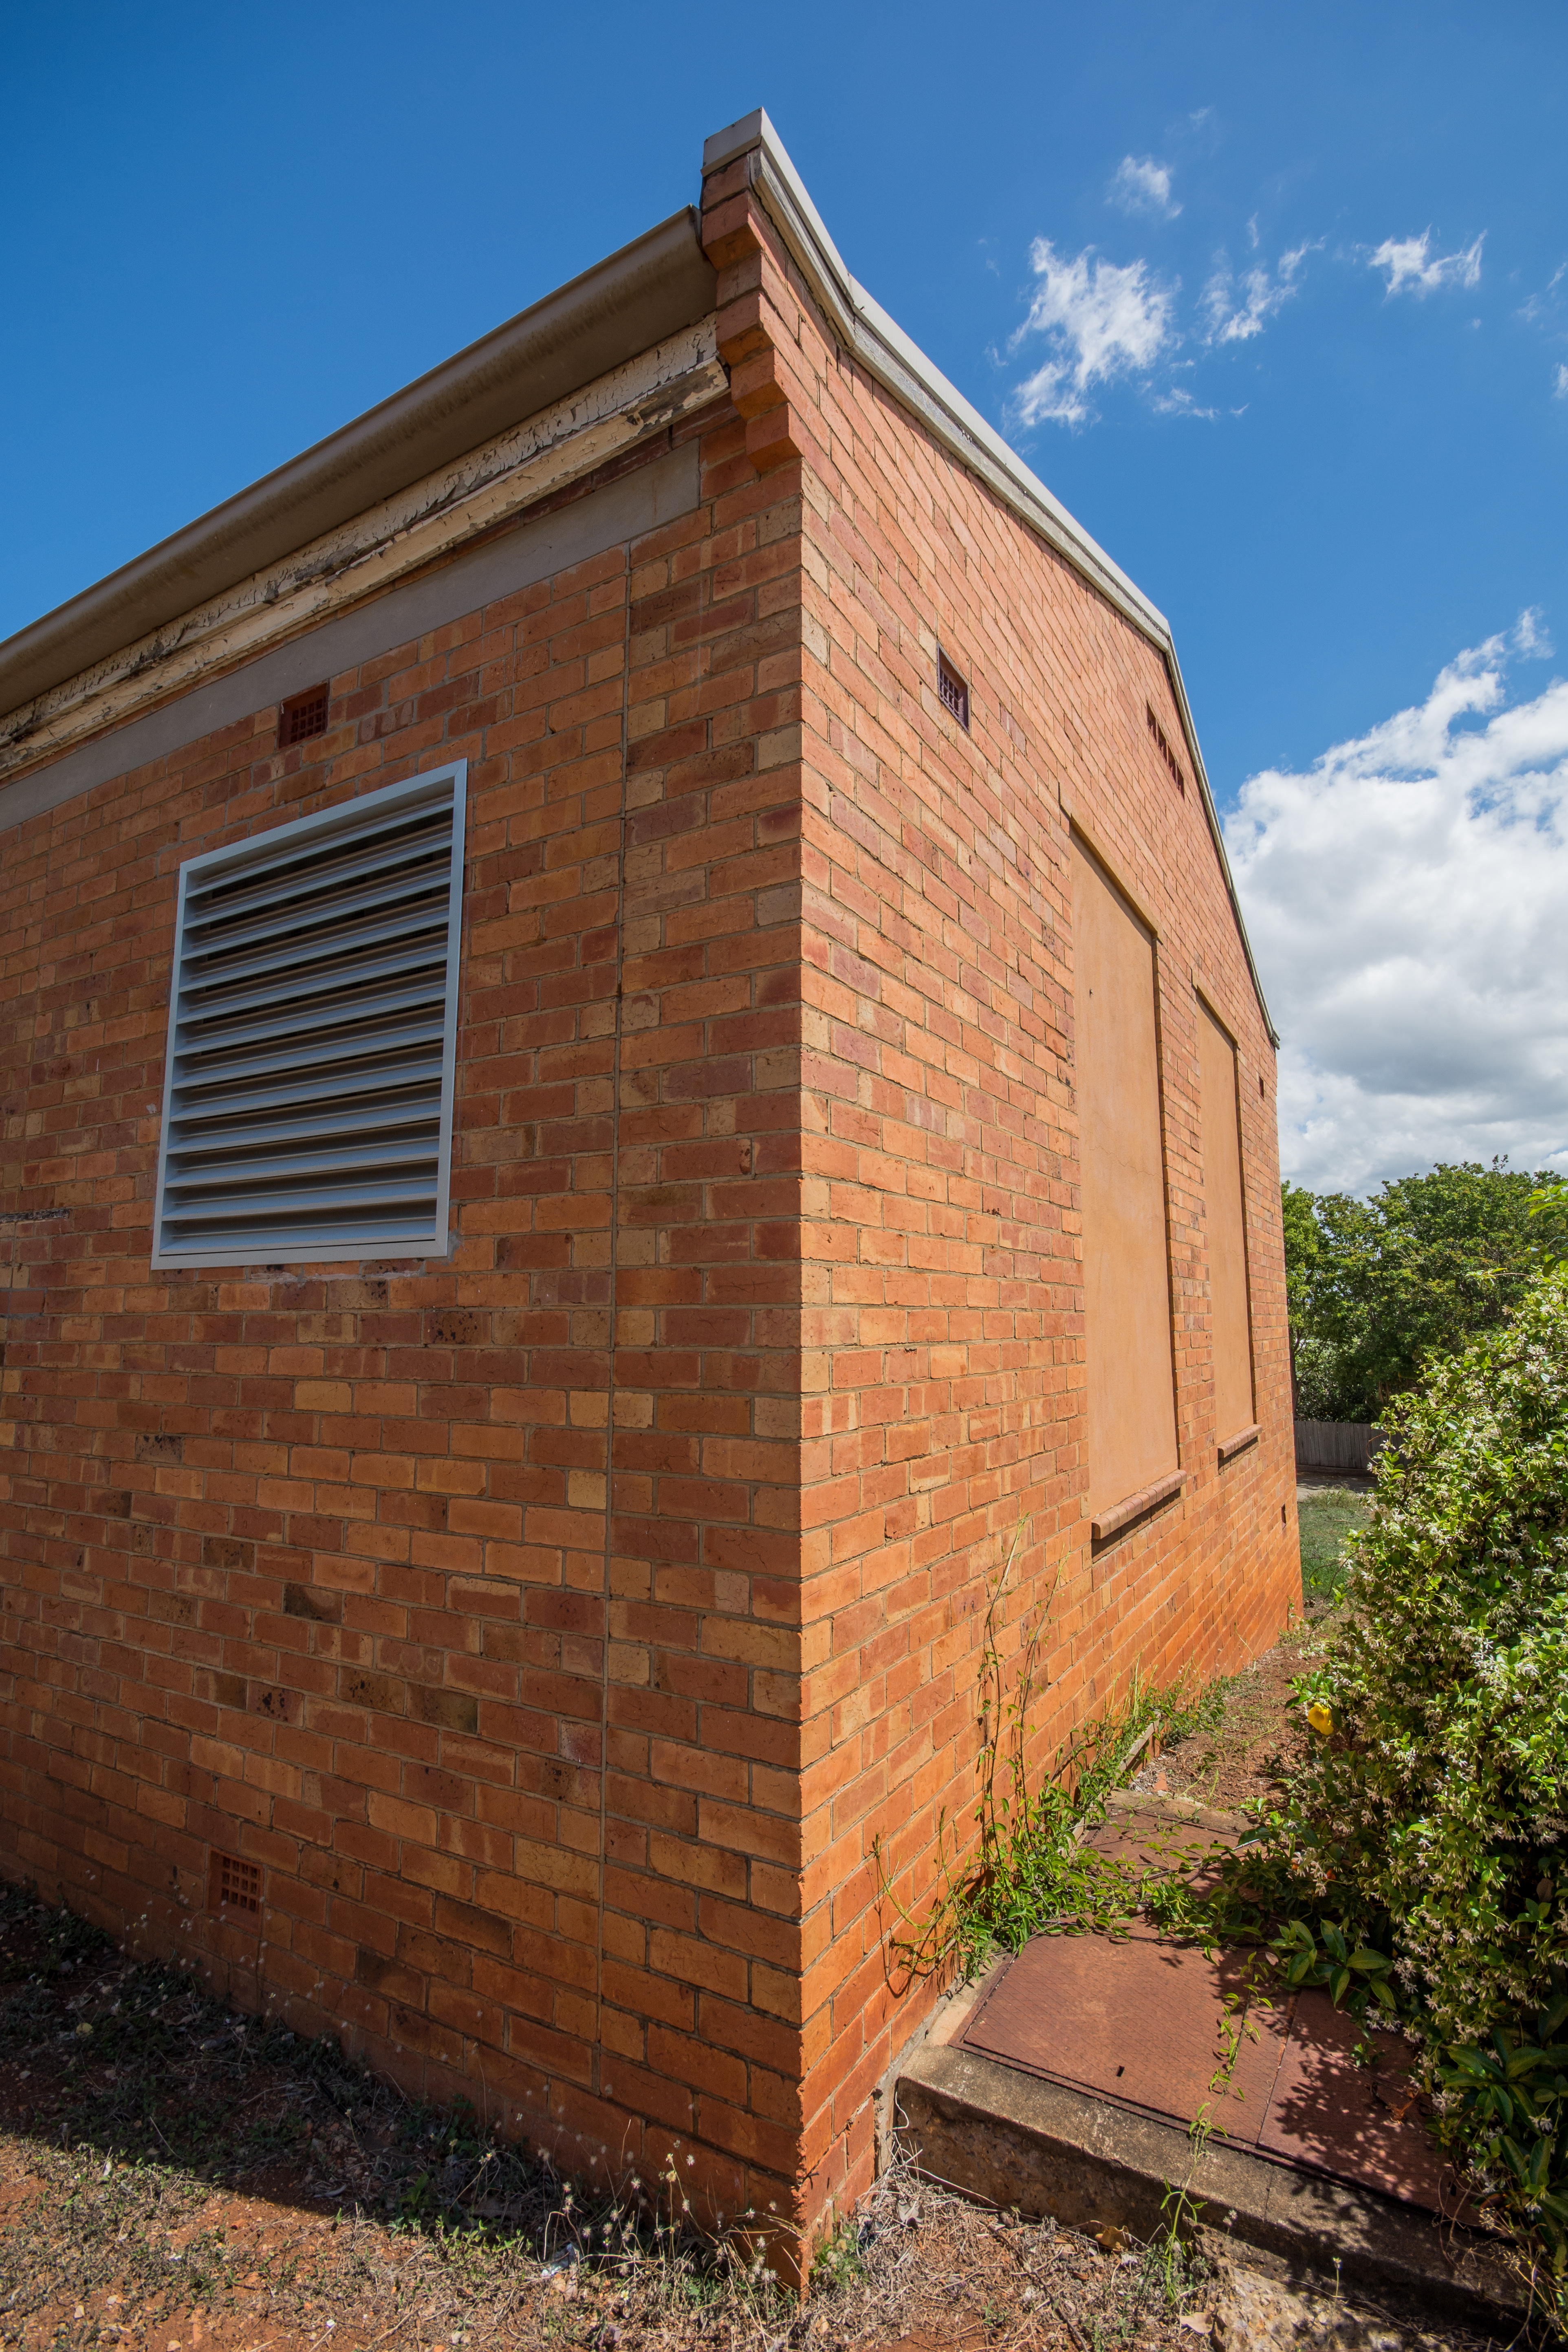 This is an image of the local heritage place known as Nudgee Telephone Exchange.